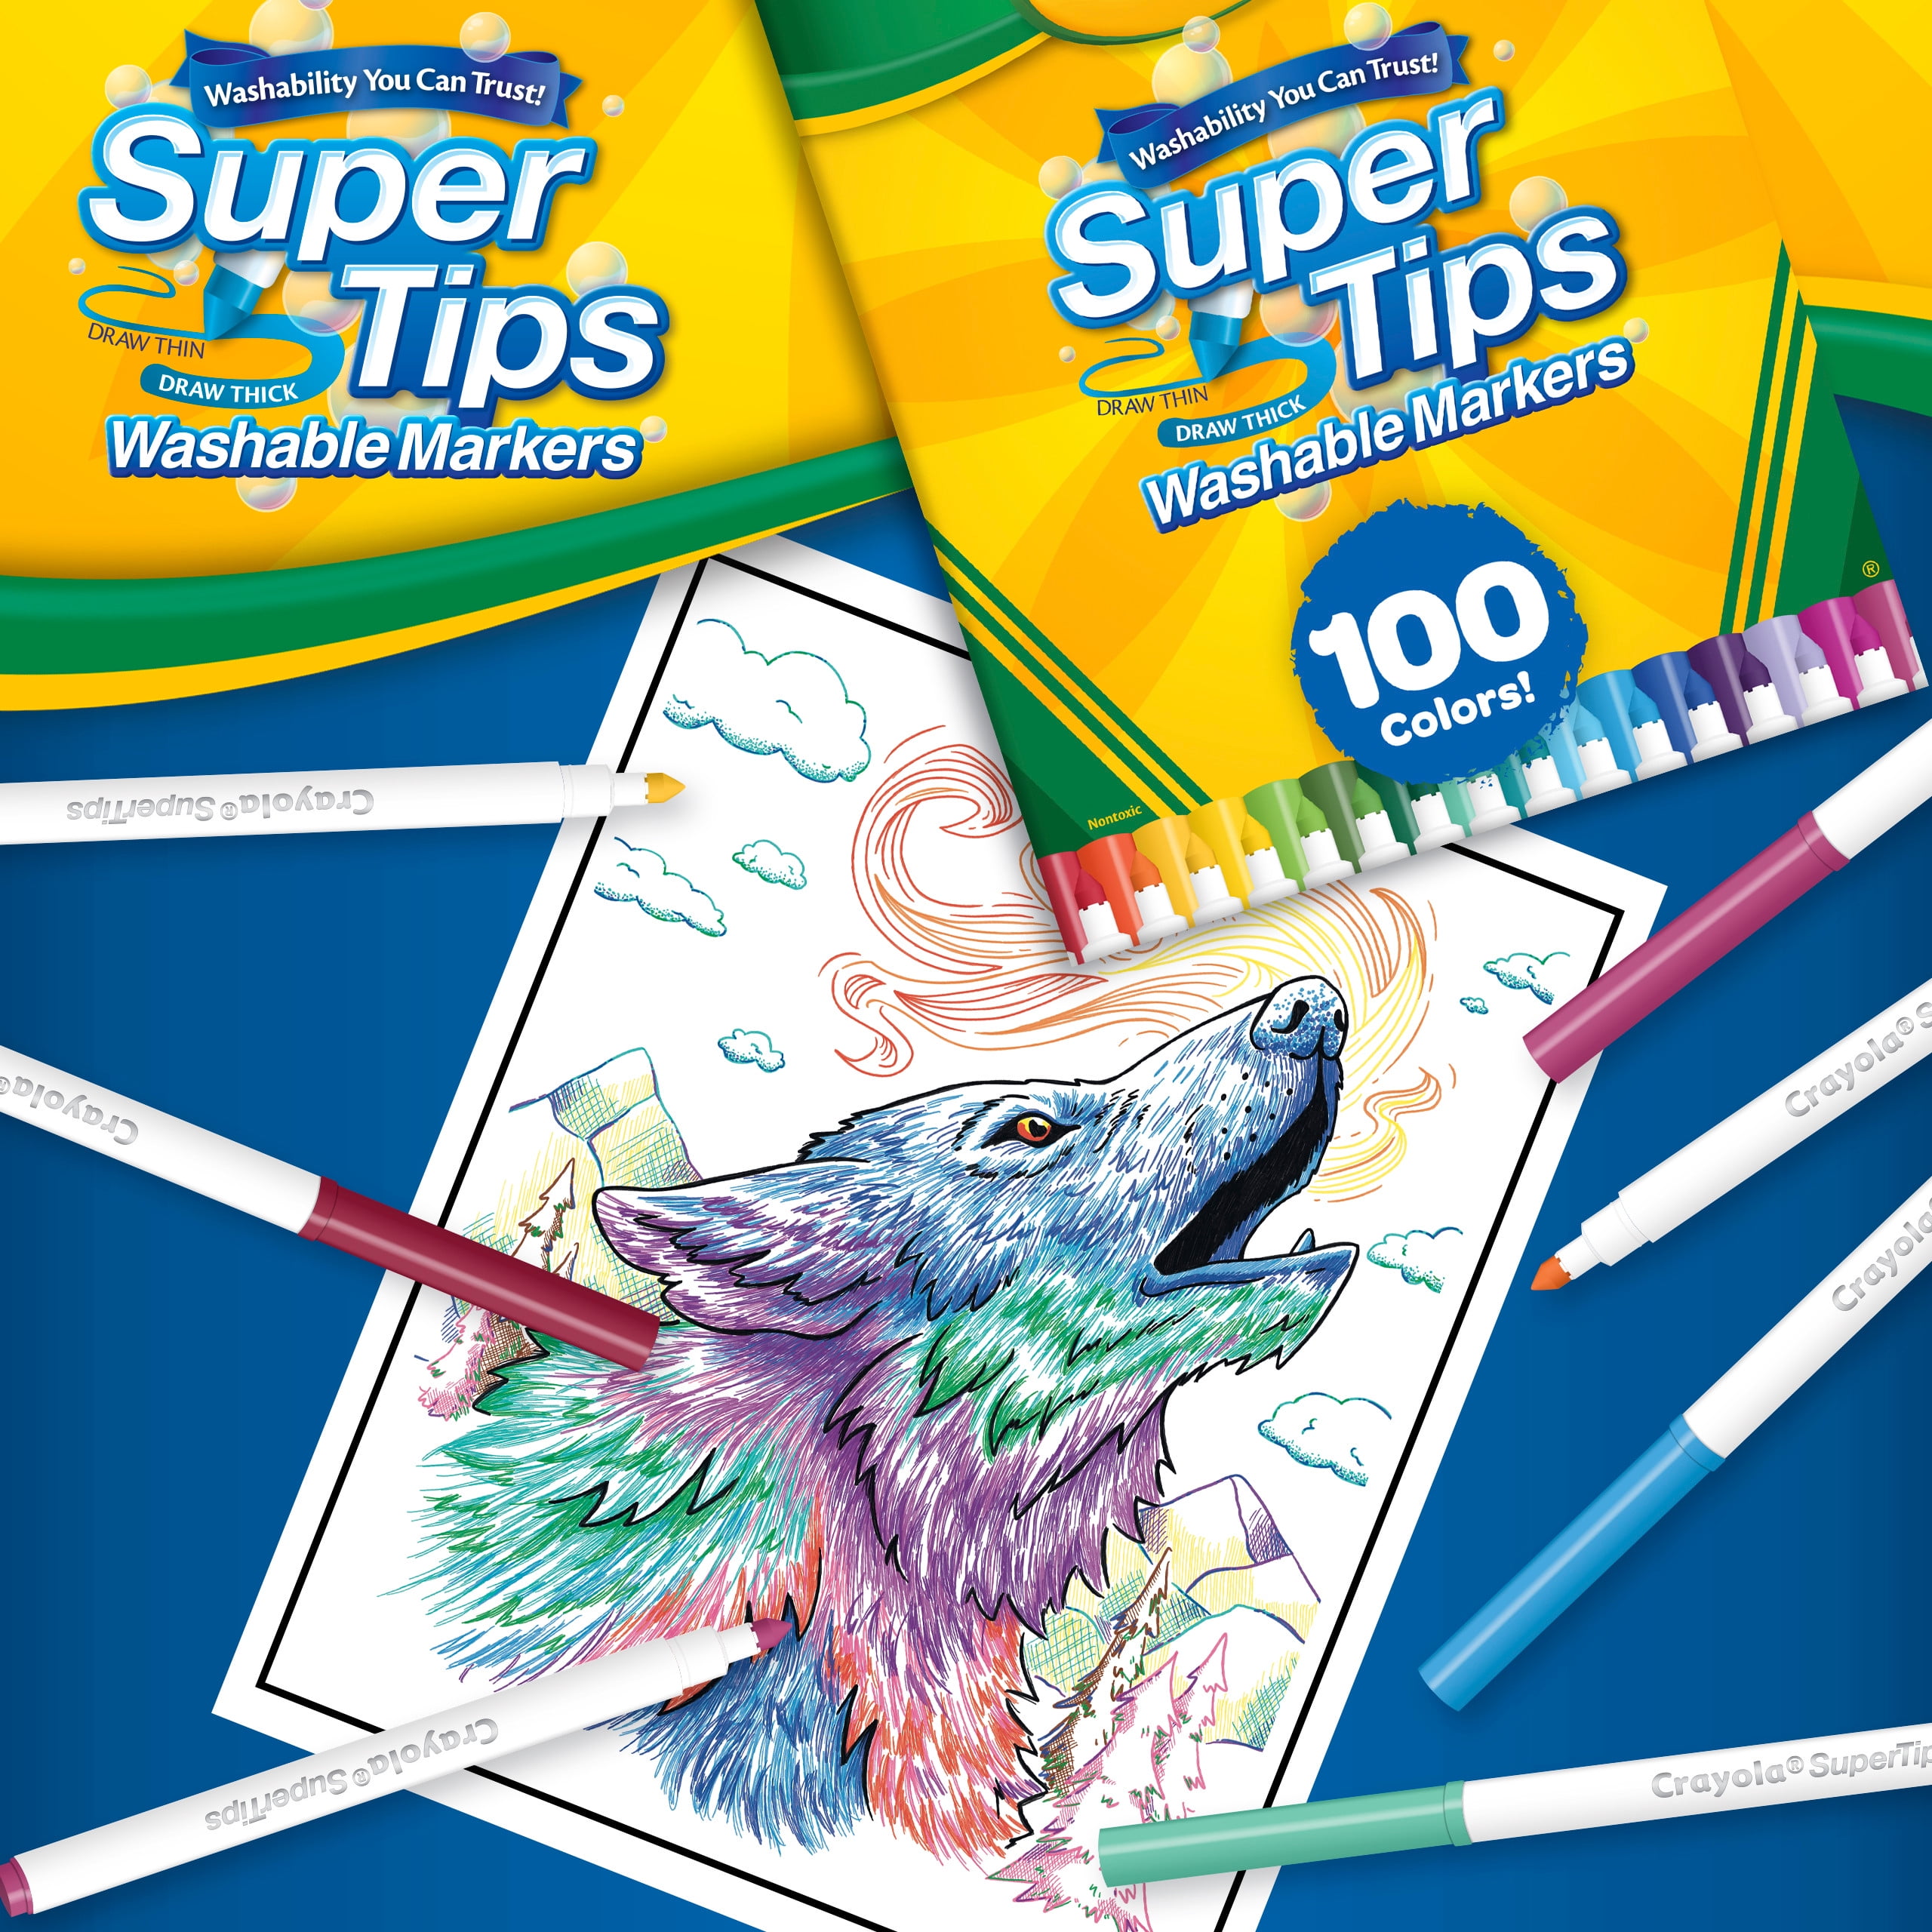 got the 100 pack of crayola supertips!!